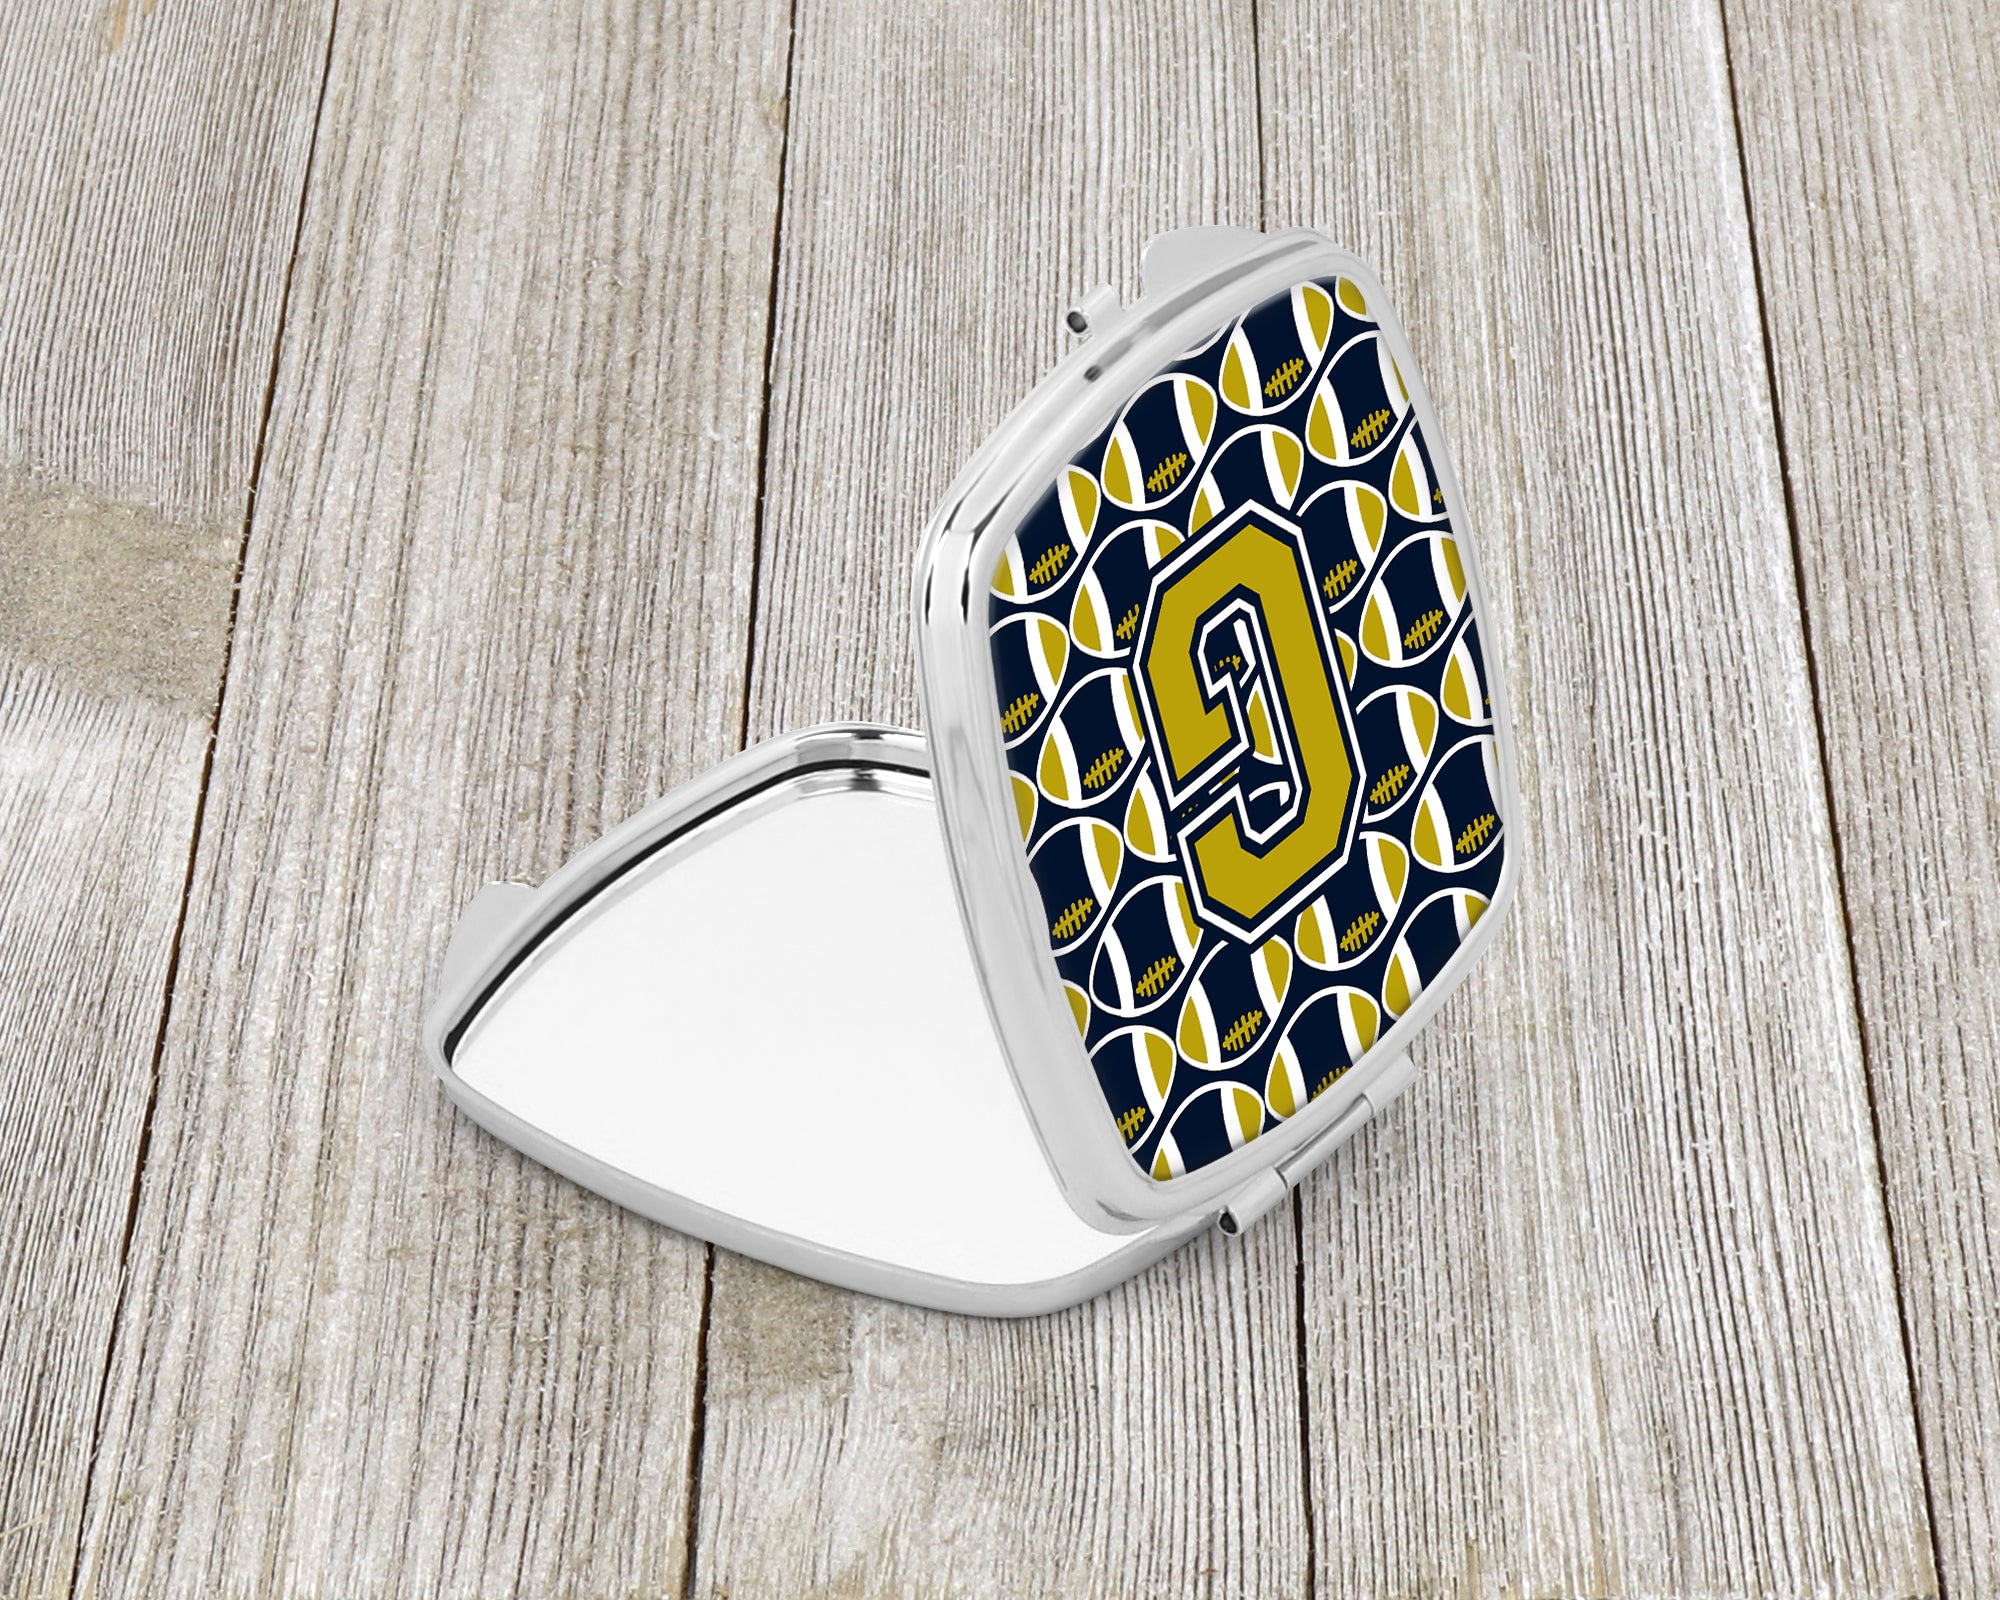 Letter G Football Blue and Gold Compact Mirror CJ1074-GSCM